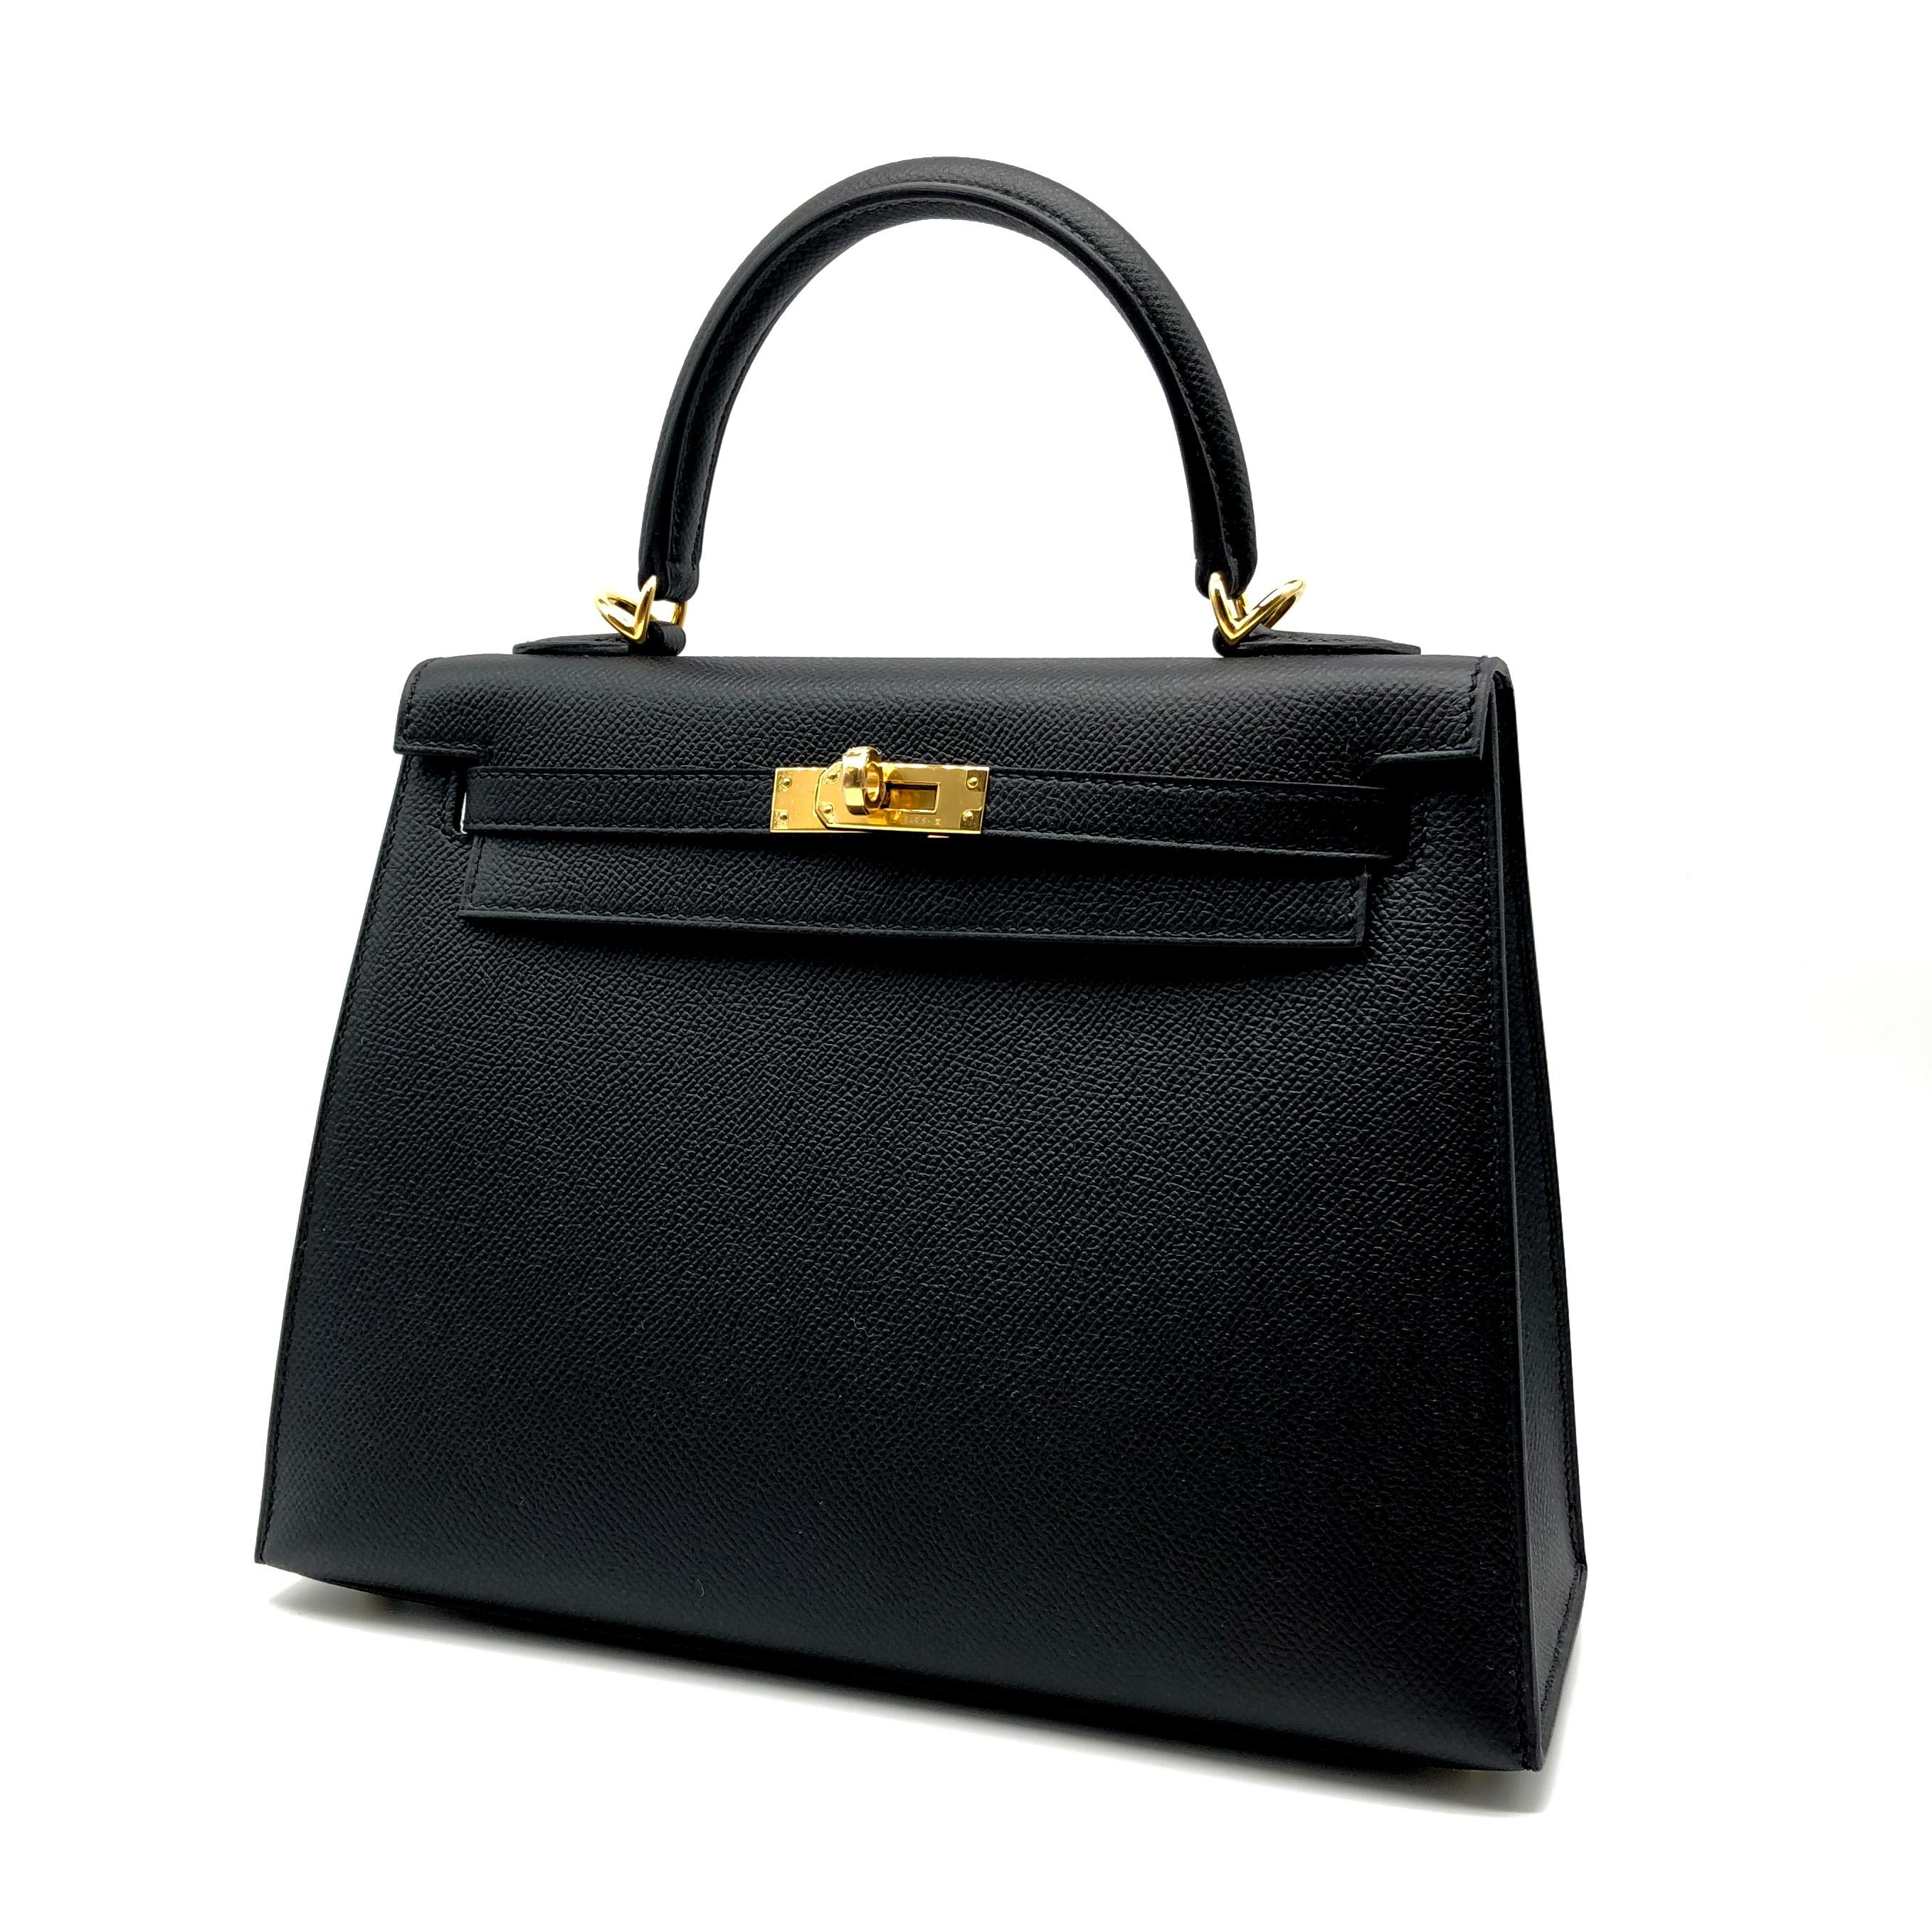 Hermès Kelly 25cm Black Epsom Leather Gold Hardware In New Condition In Sydney, New South Wales